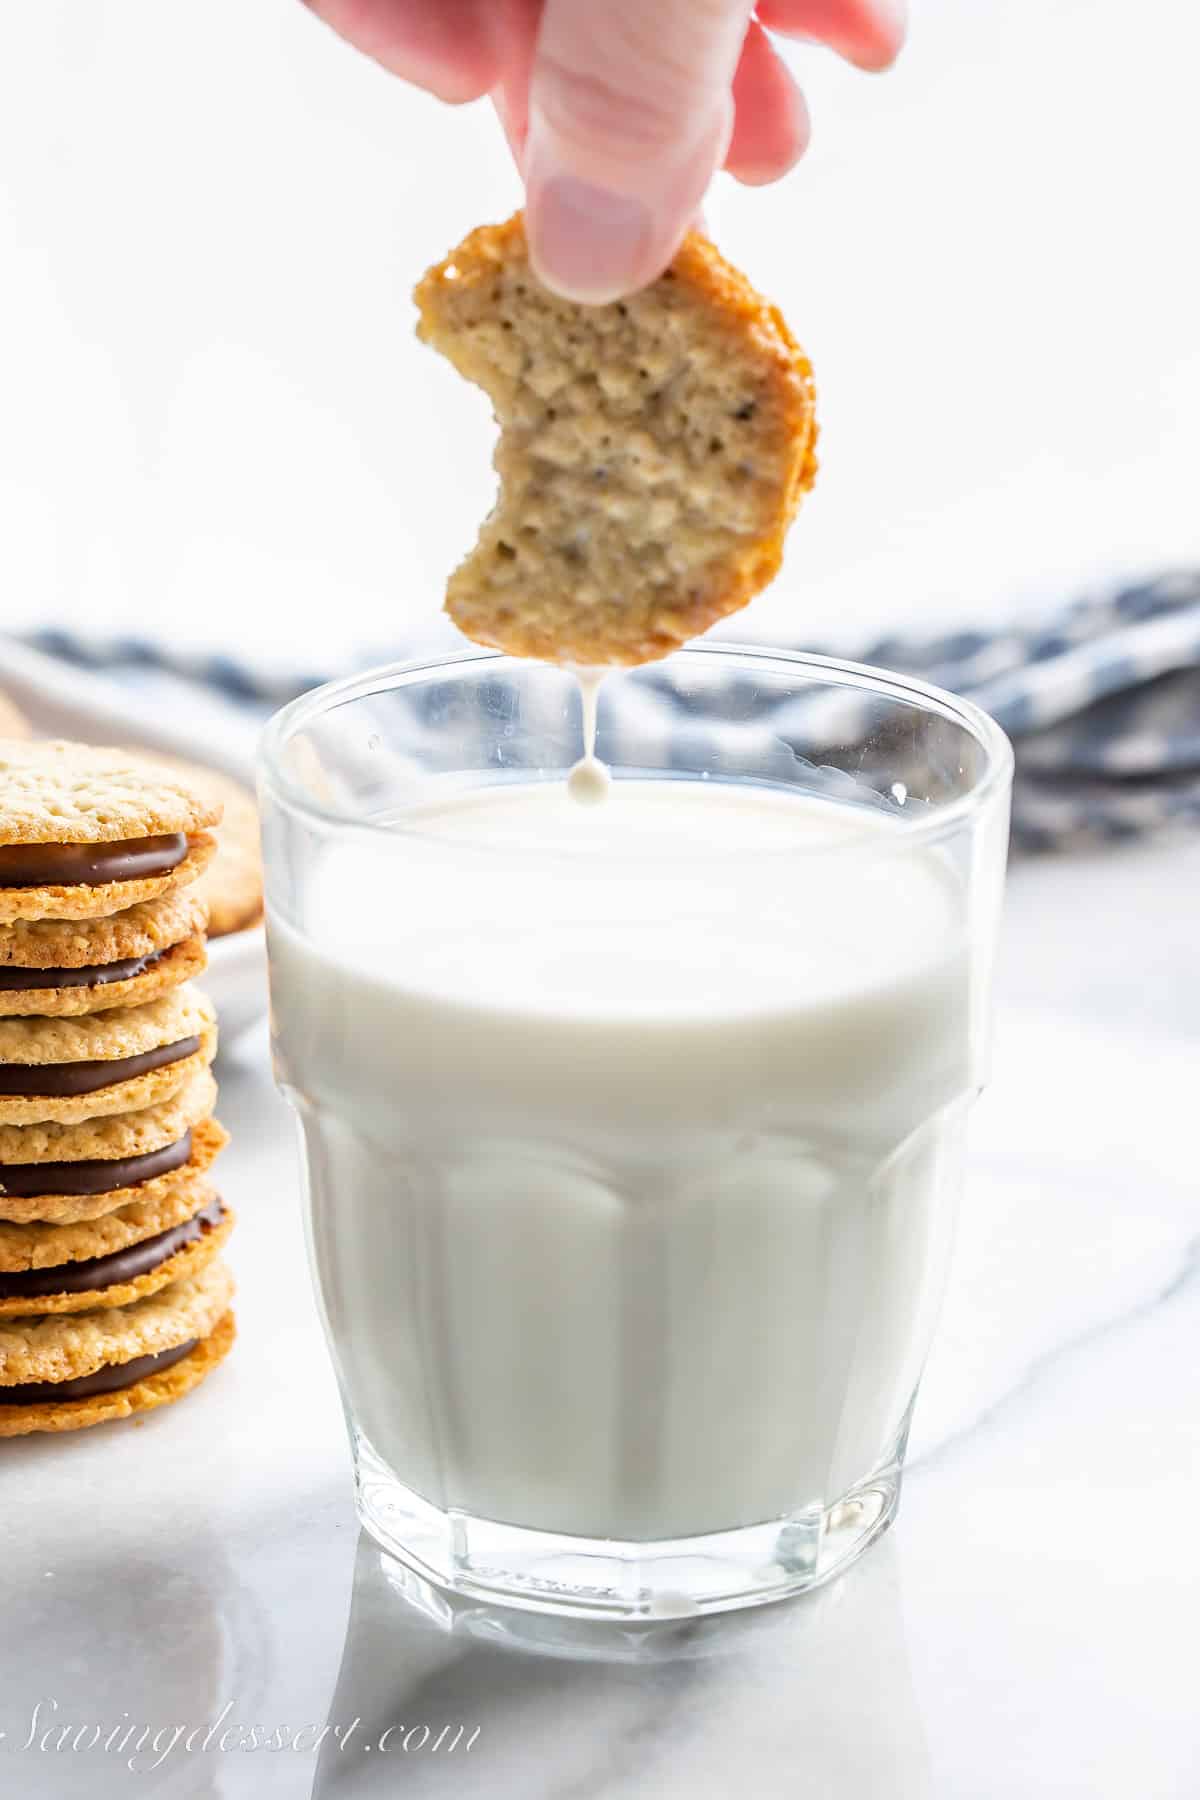 a cookie being dipped in a glass of milk